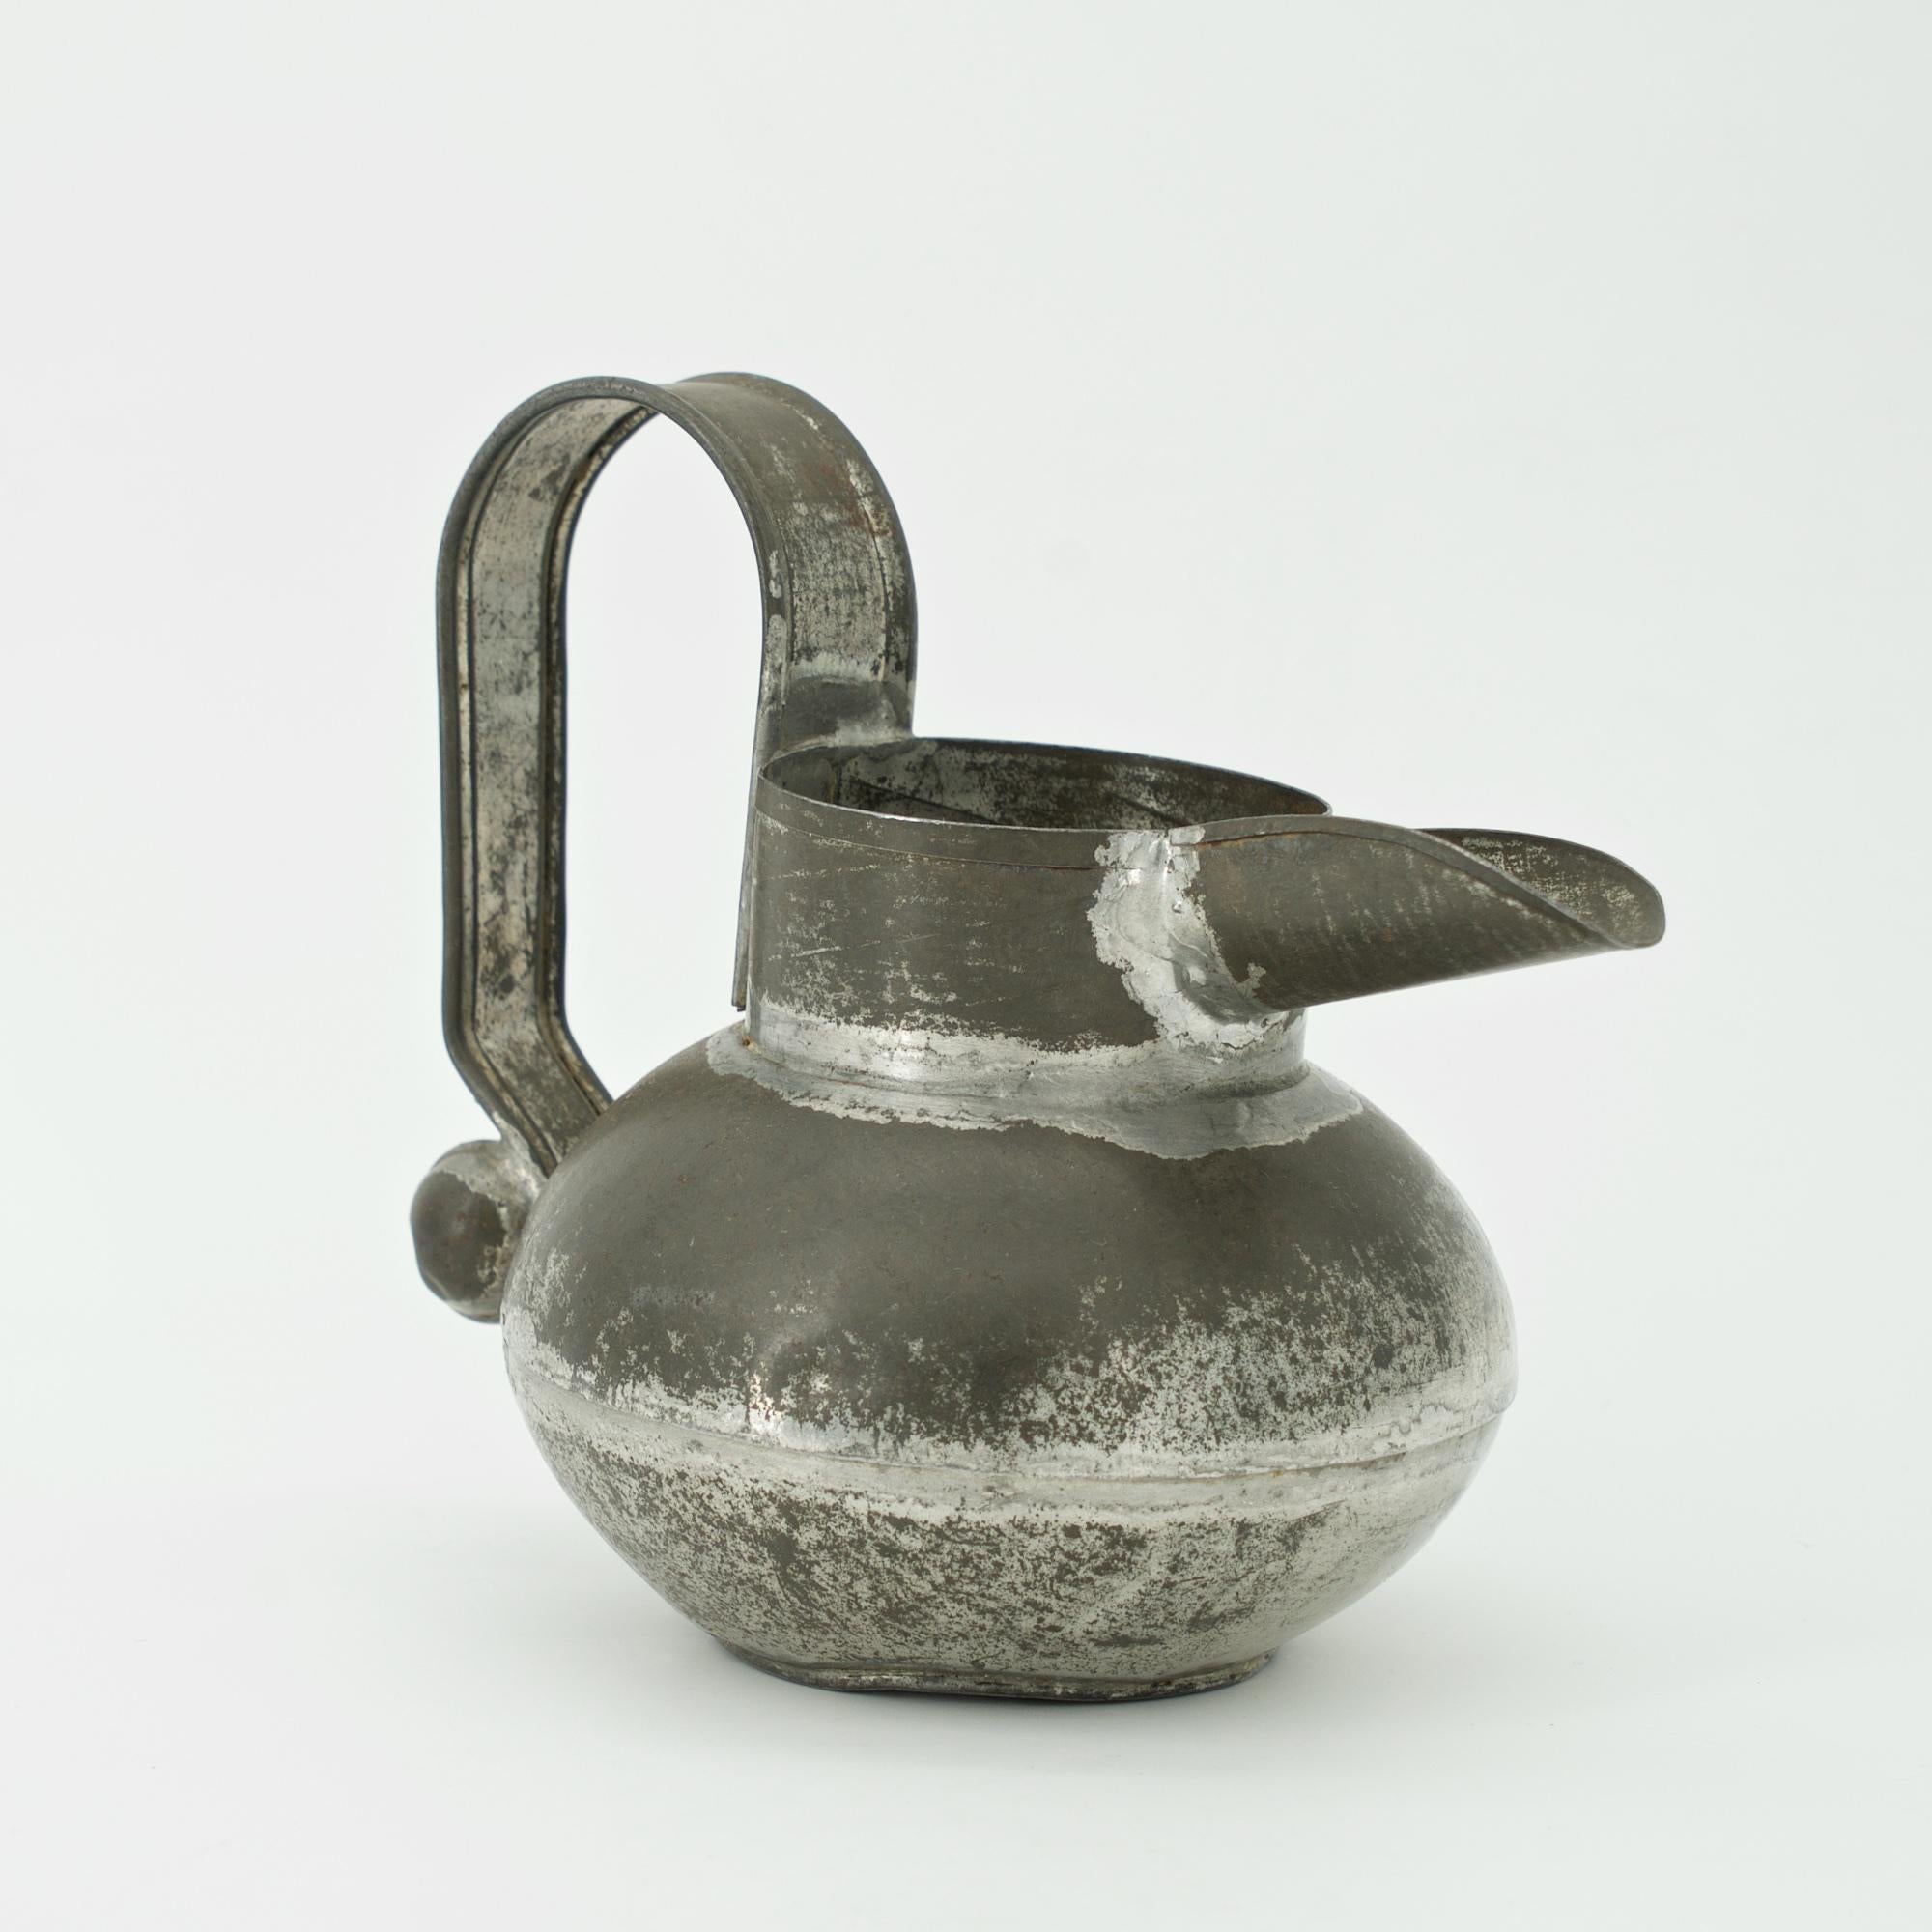 Spratling's early designs were in tin and progressed to silver. Many were prototypes for his later silver designs. Here we have an Etruscan inspired small cream pitcher, impressed TAXCO, and Spratling's WS initials.